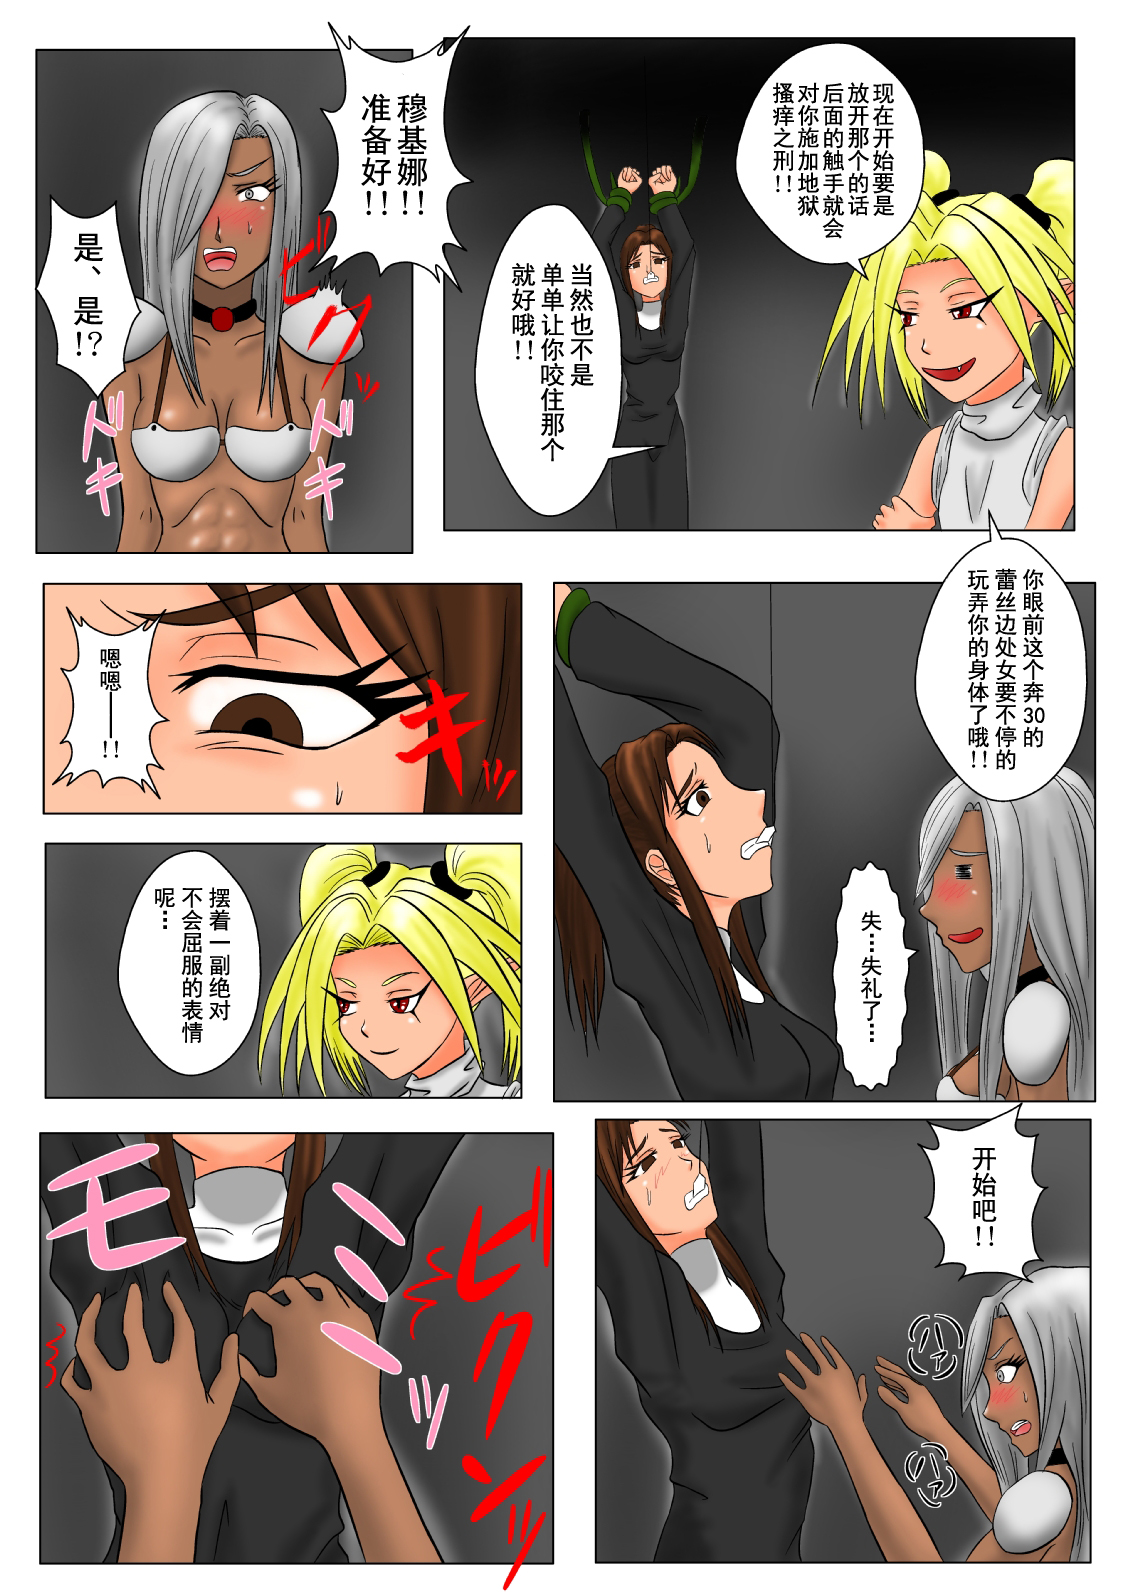 [Tick (Tickzou)] The Tales of Tickling Vol. 3 [Chinese] [狂笑汉化组] [Digital] page 34 full